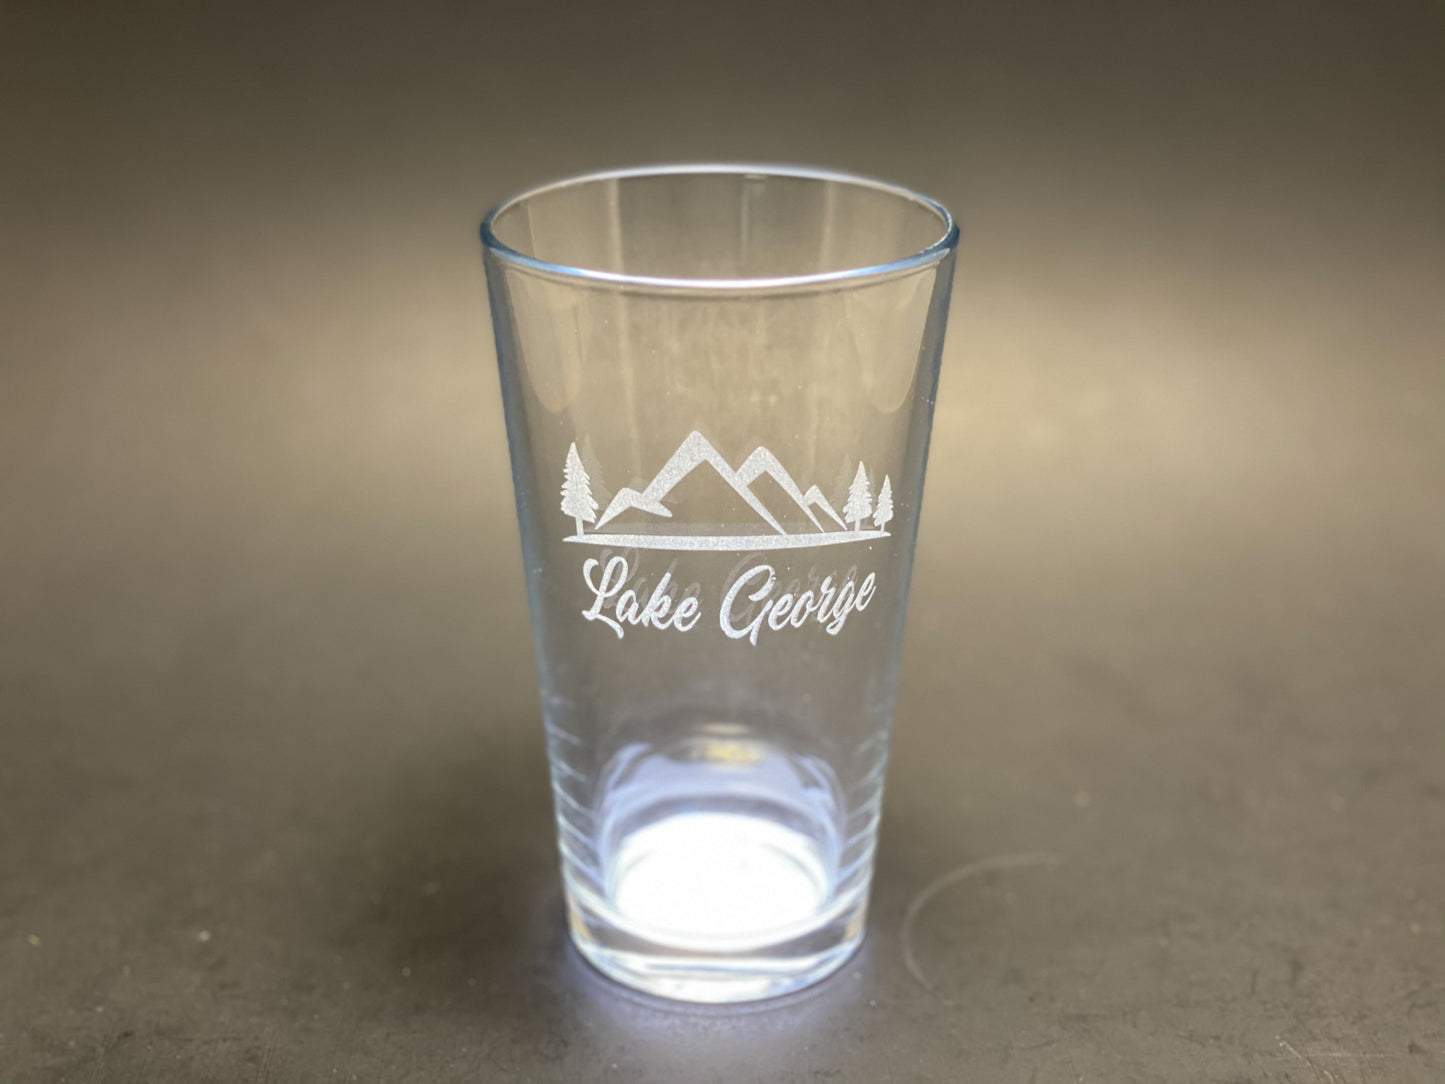 Lake George with Mountains -  Pint glass